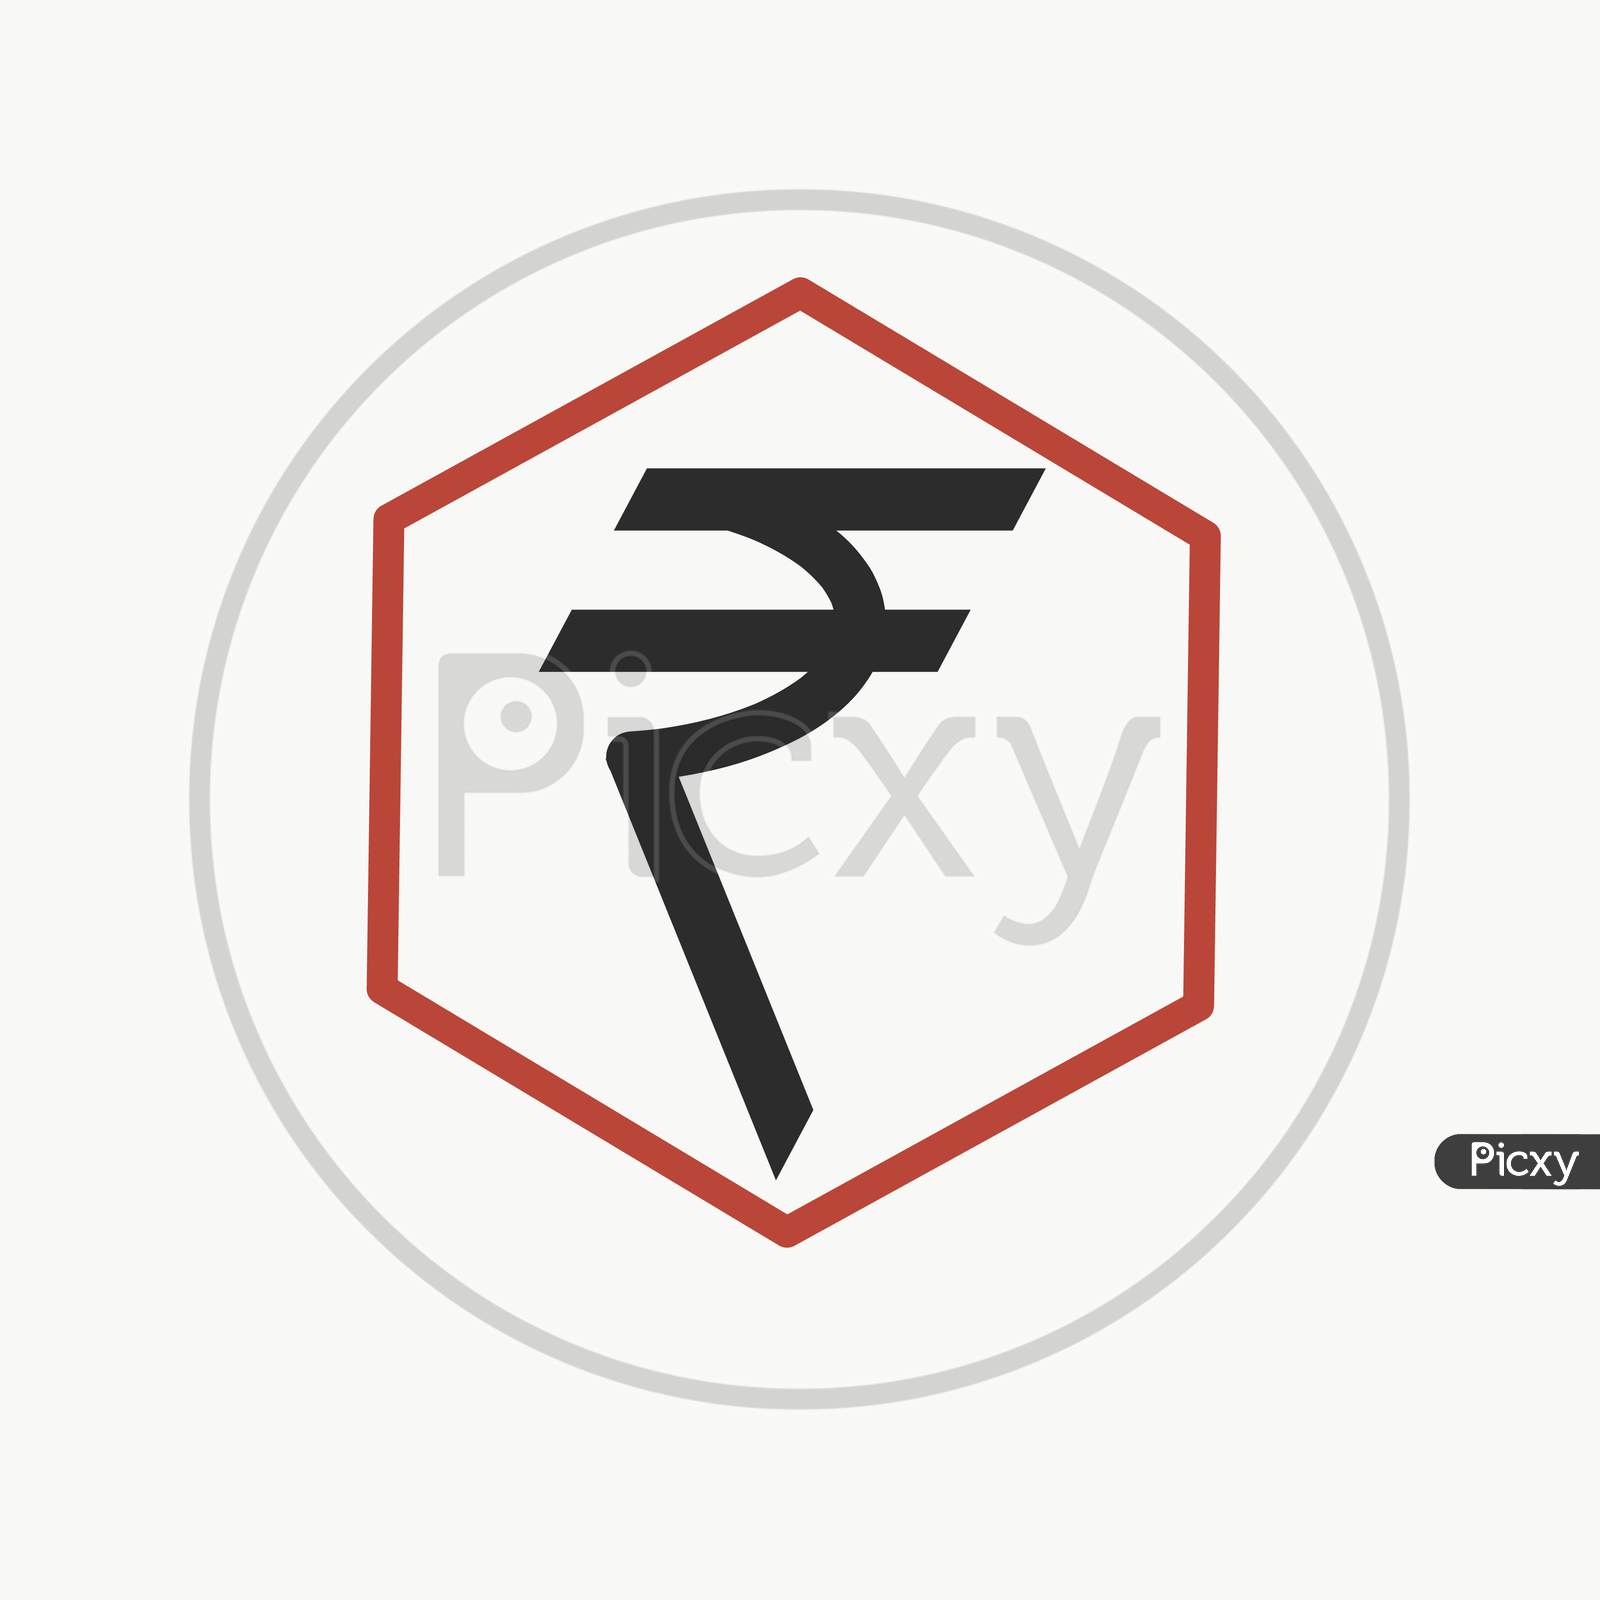 rupee sign red